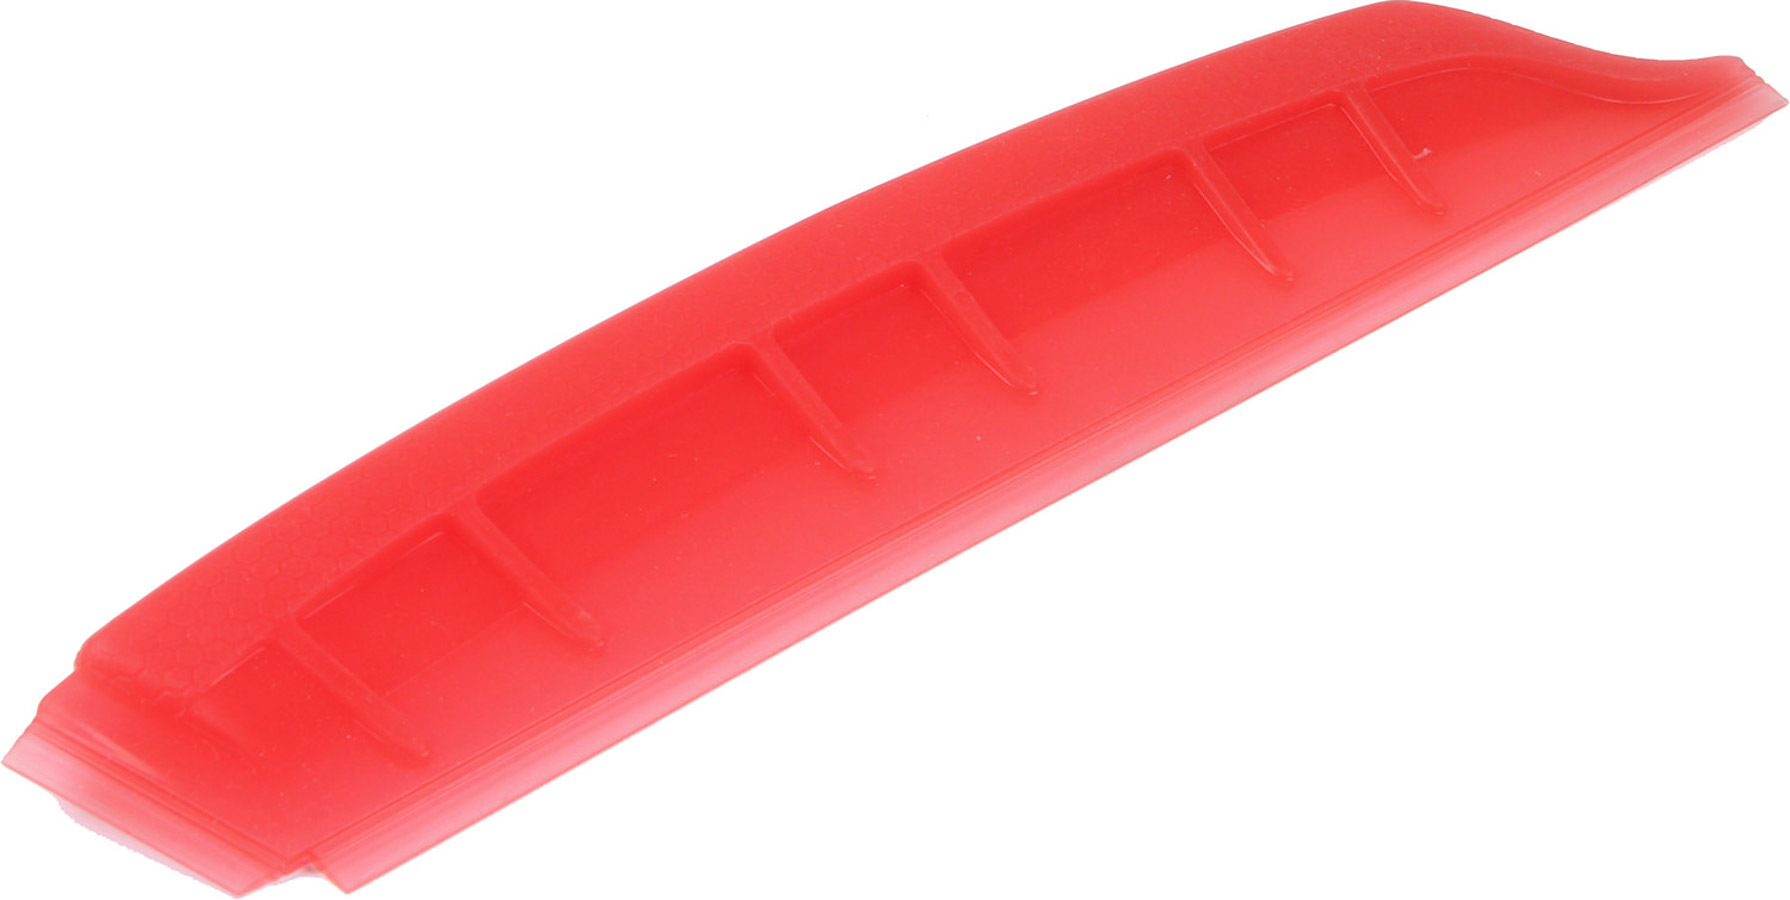 CALIFORNIA CAR DUSTER Water Blade, Jelly Blade, Silicone, Red, Each